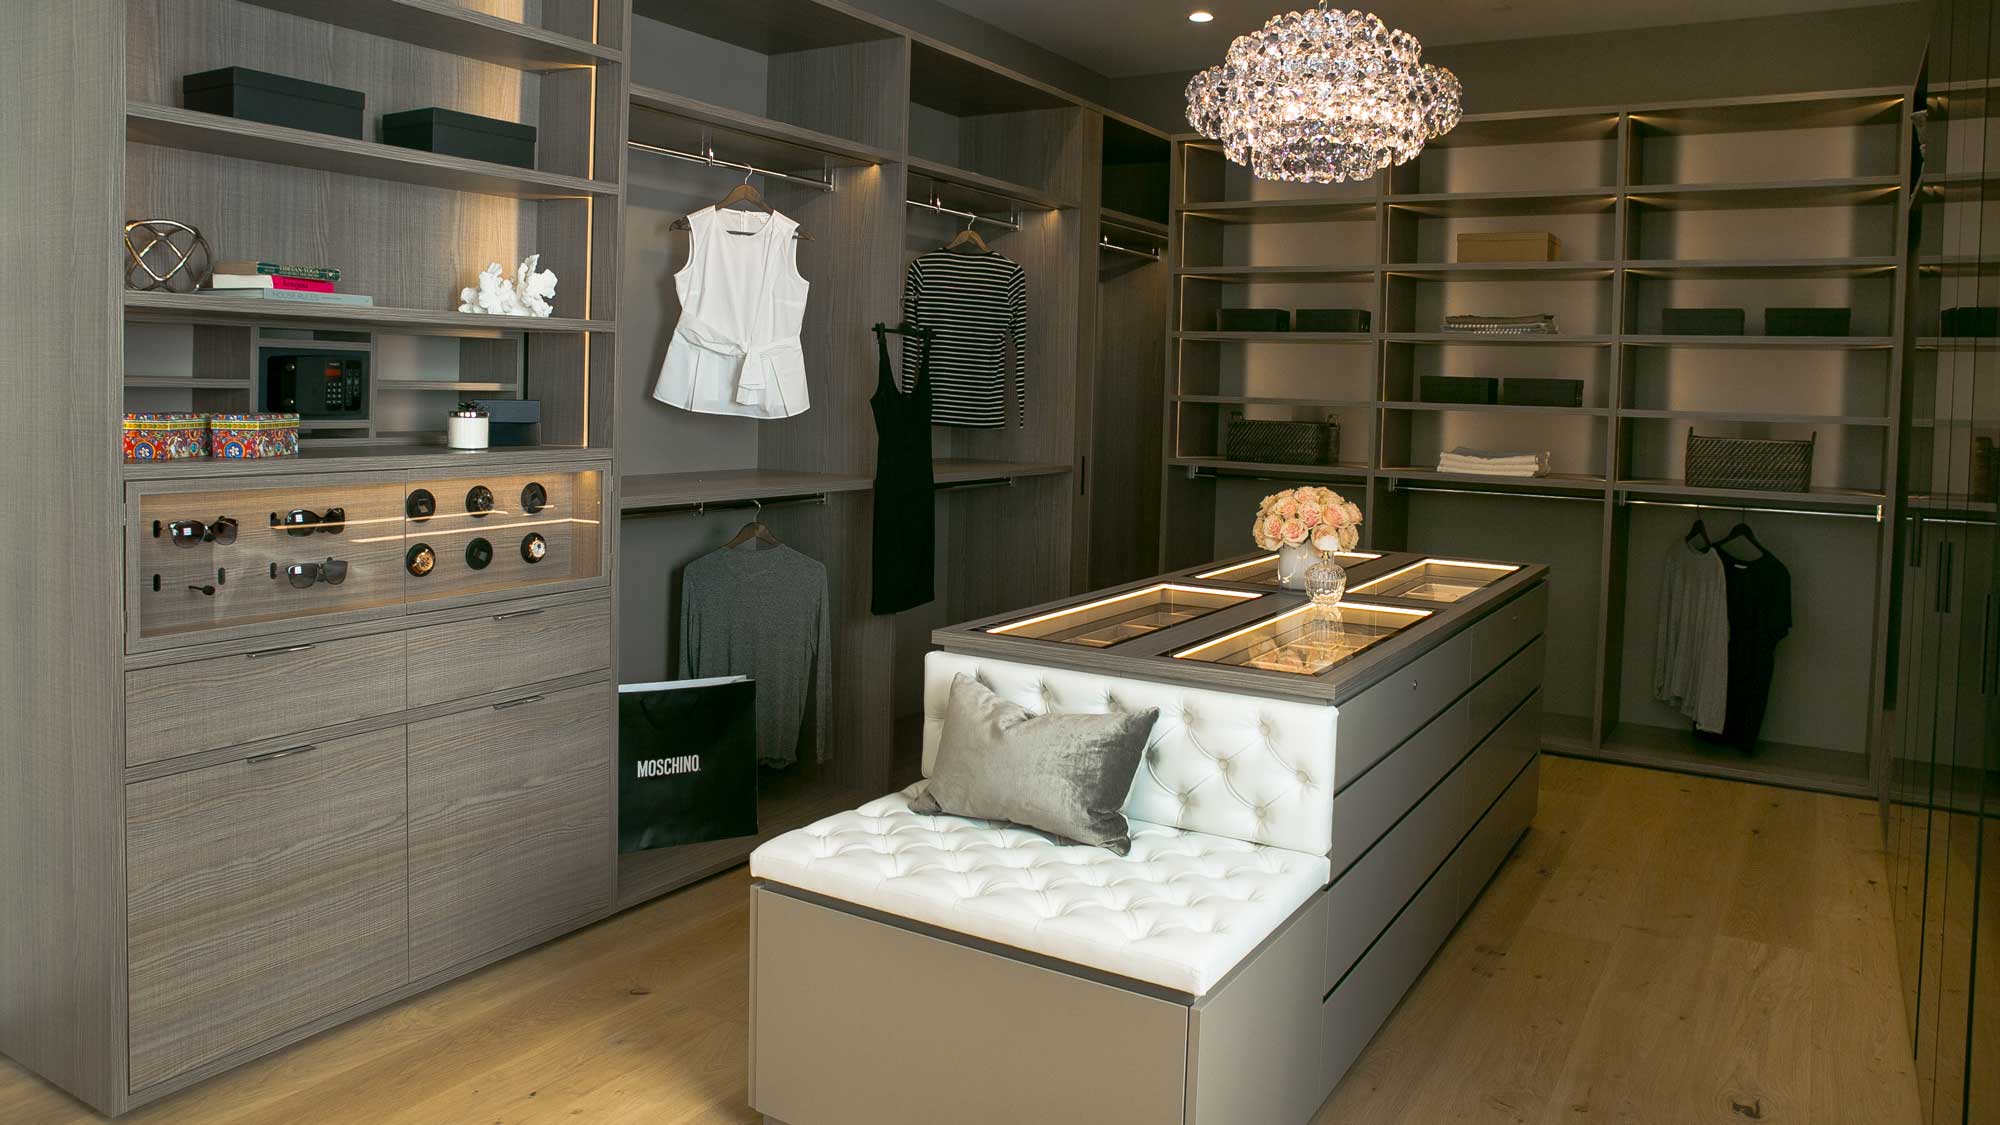 Let Schmalenbach Design the Perfect Walk-In Closet for You